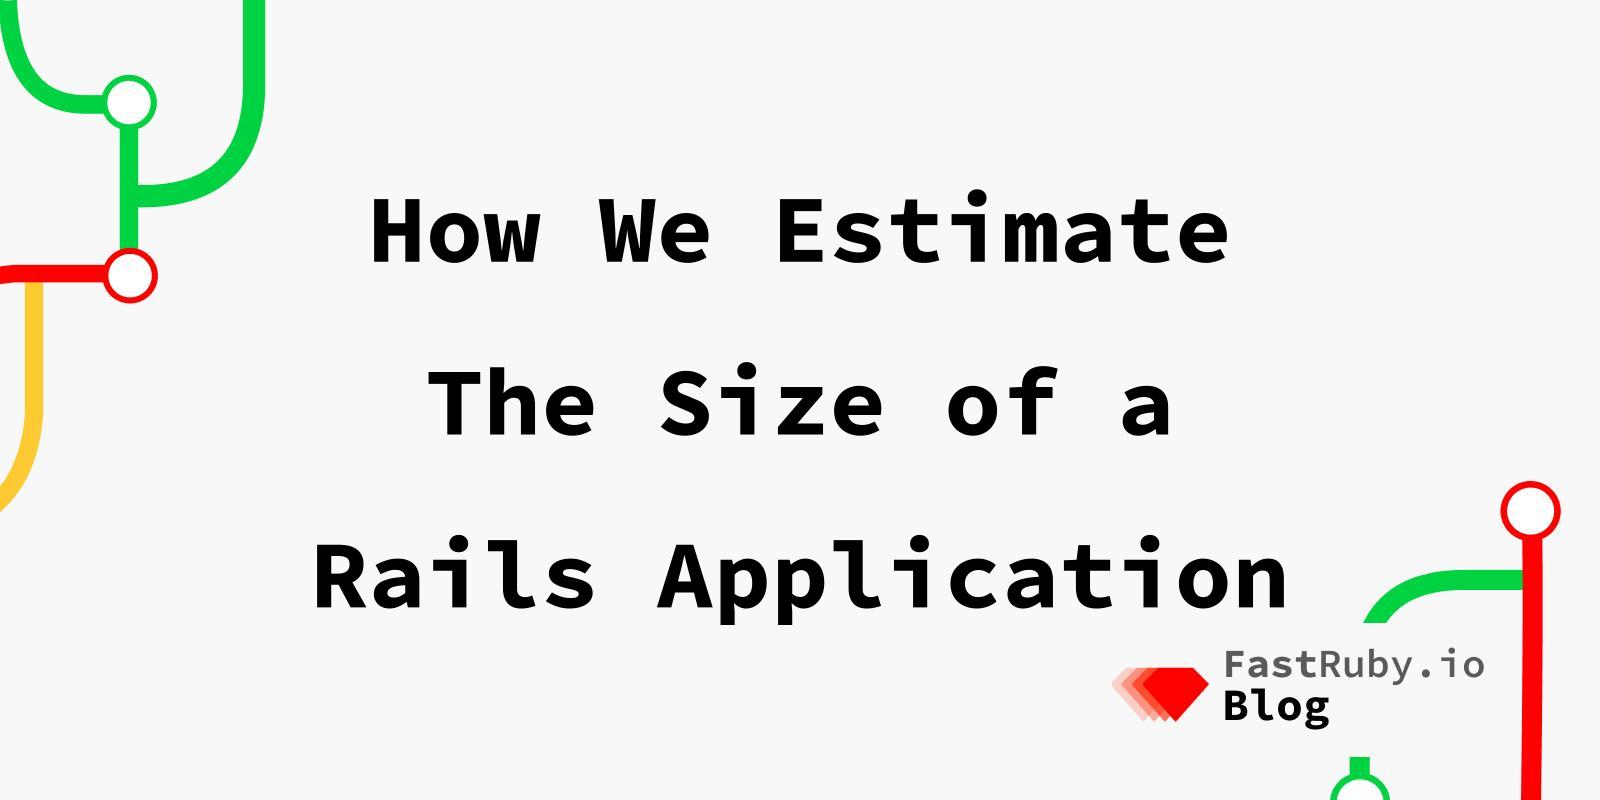 How We Estimate The Size of a Rails Application